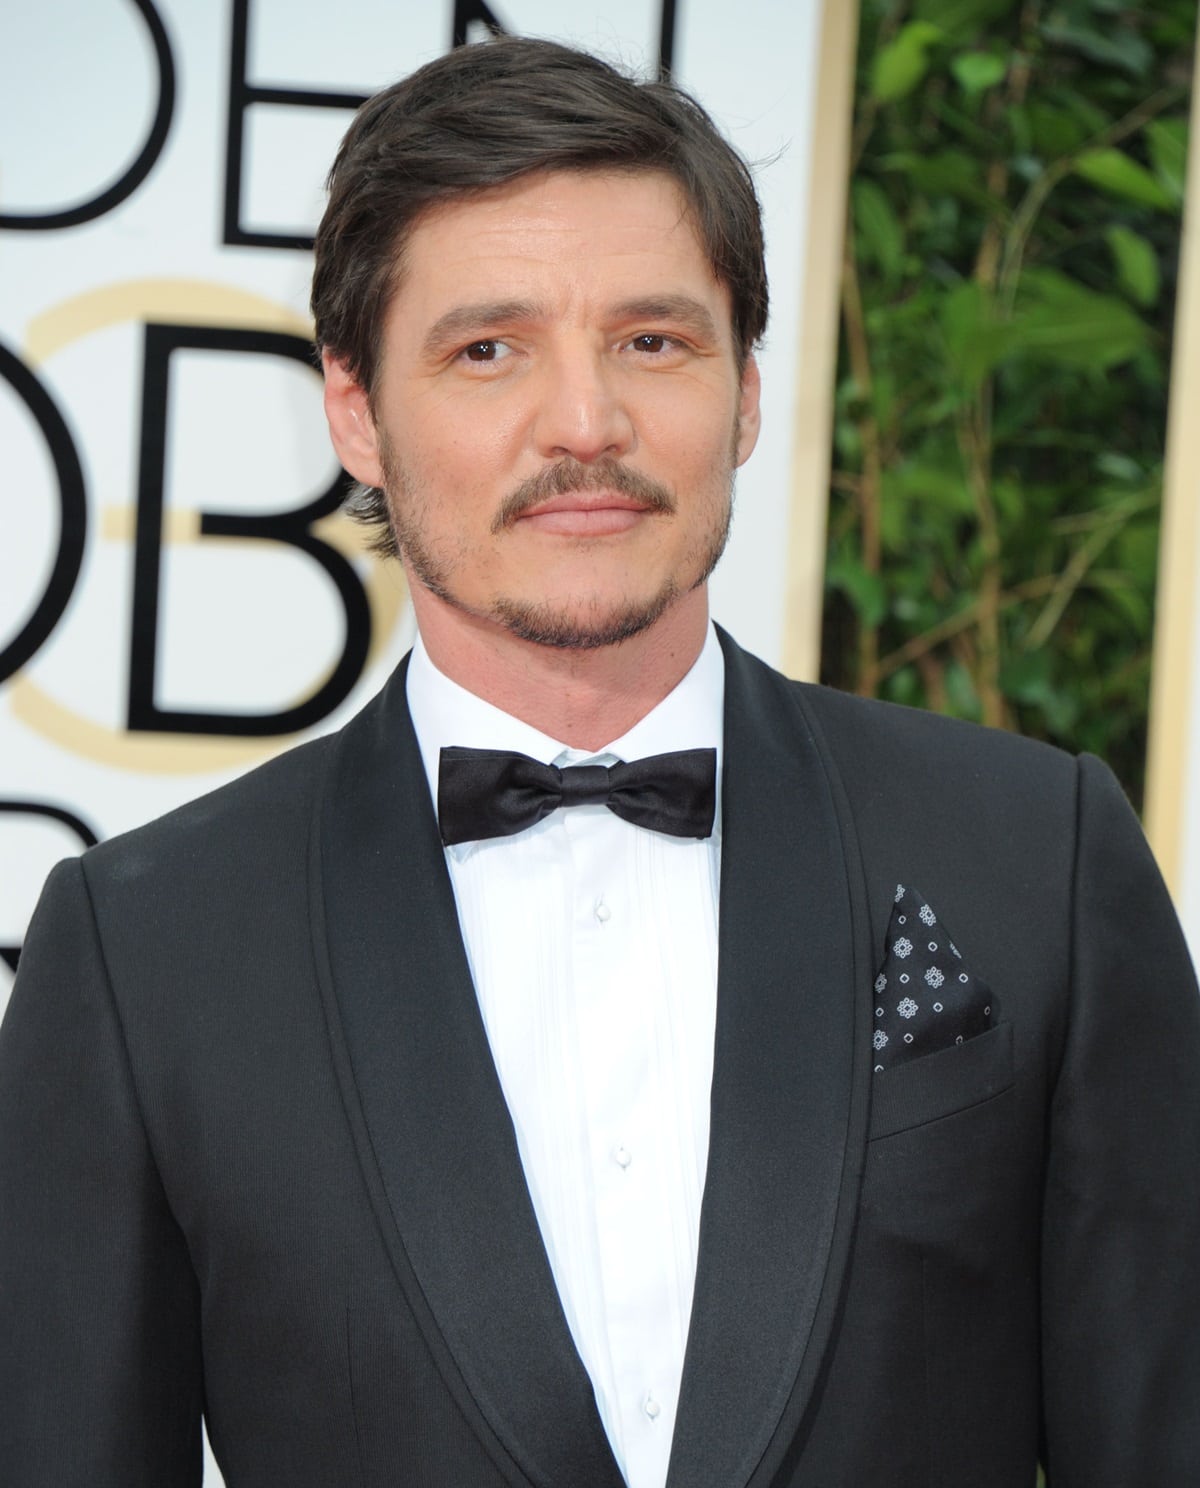 Pedro Pascal says that the circumstances of his mother's death made it difficult for them to remember her as the person she was, and he thinks about her every day